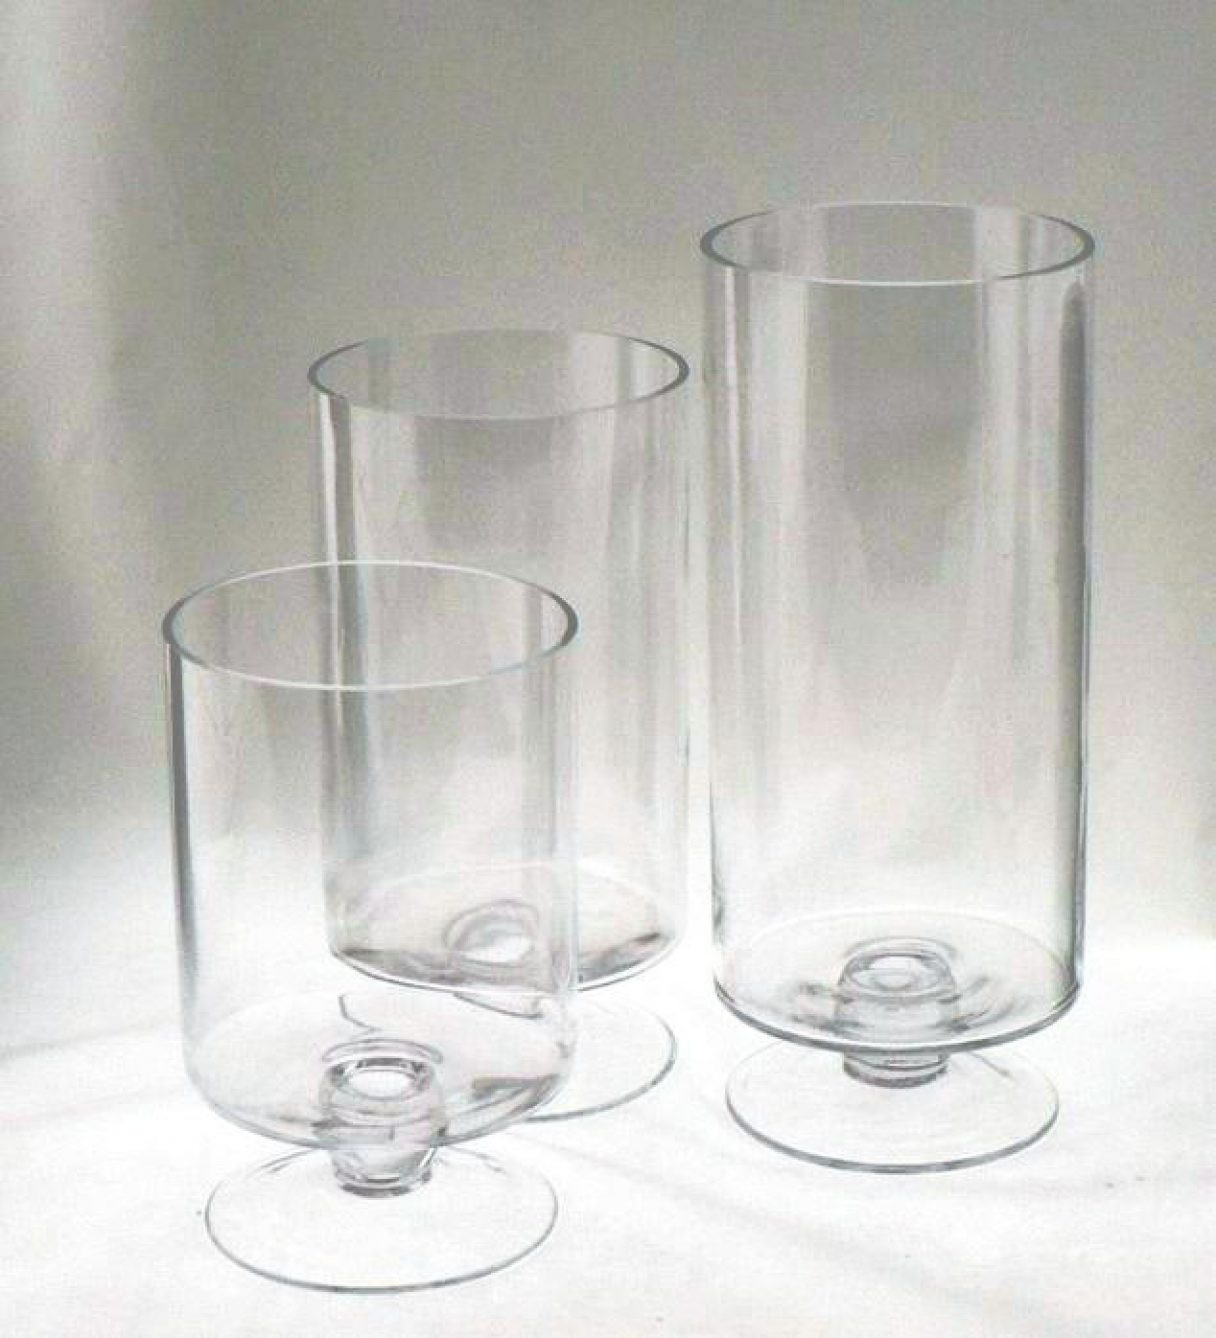 14 Fabulous Dollar Glass Cylinder Vases 2024 free download dollar glass cylinder vases of dollar tree bulk vases wiring diagrams e280a2 in vases in bulk design ideas bowls and containers at dollartree flower rh alfawhite info dollar tree cylinder va